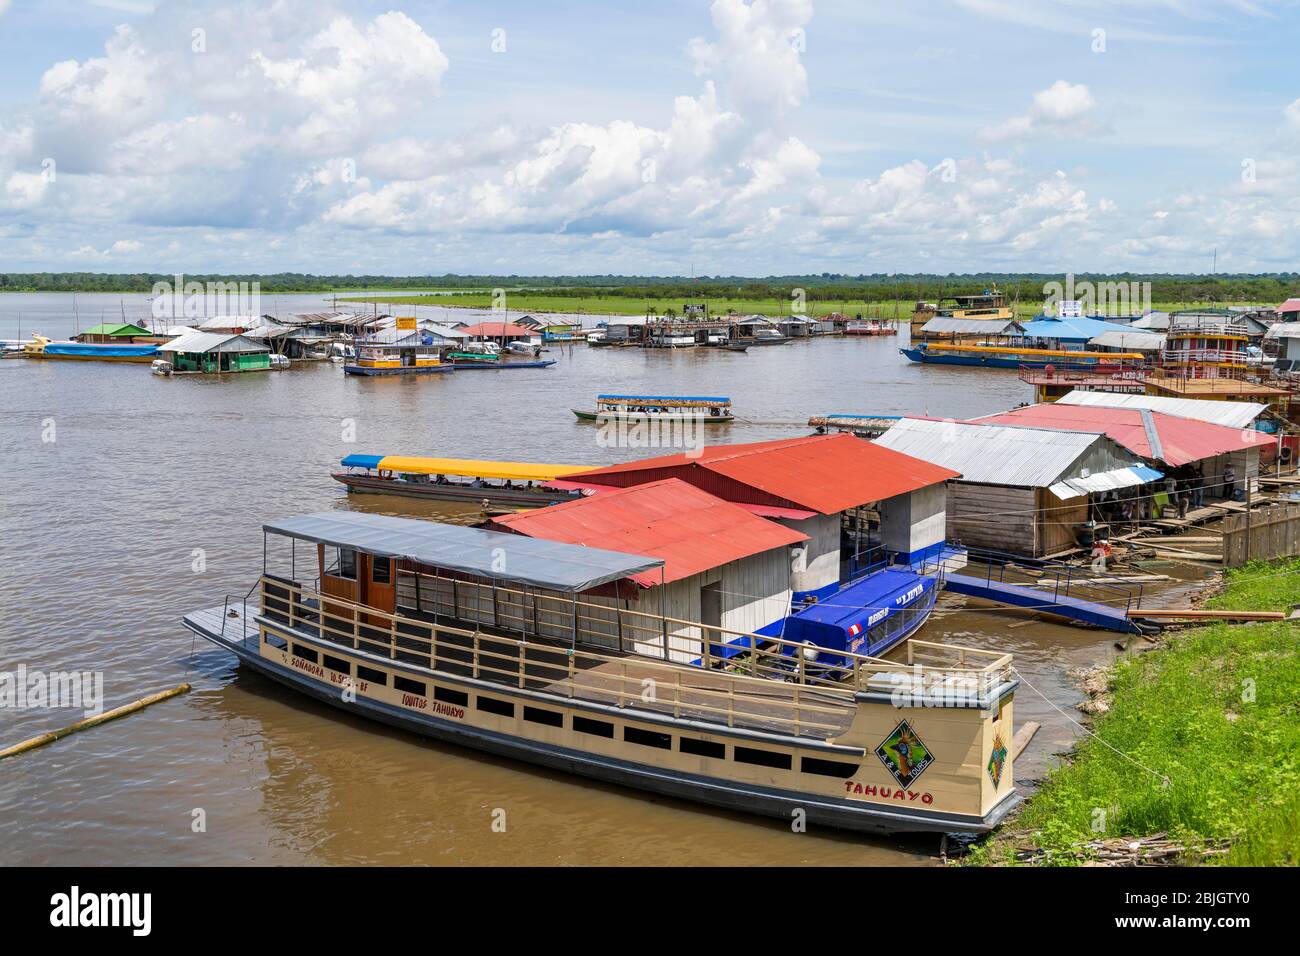 Wooden ships and floating houses in the port, River Itaya, Iquitos, Loreto, Peru Stock Photo